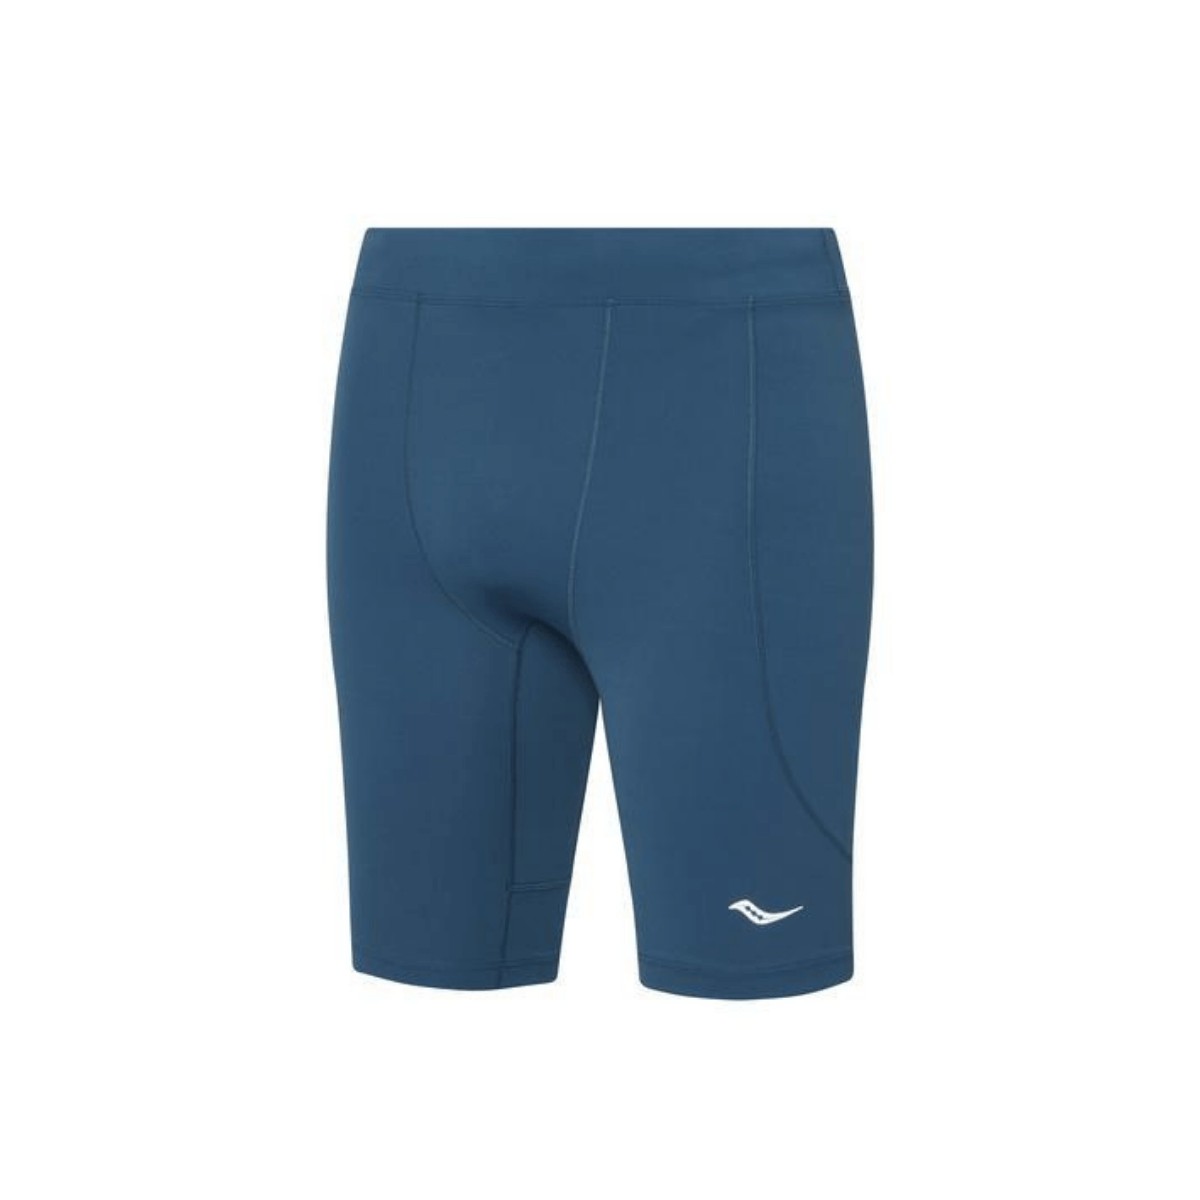 Buy Saucony Bell Lap Short Tights at the Best Price